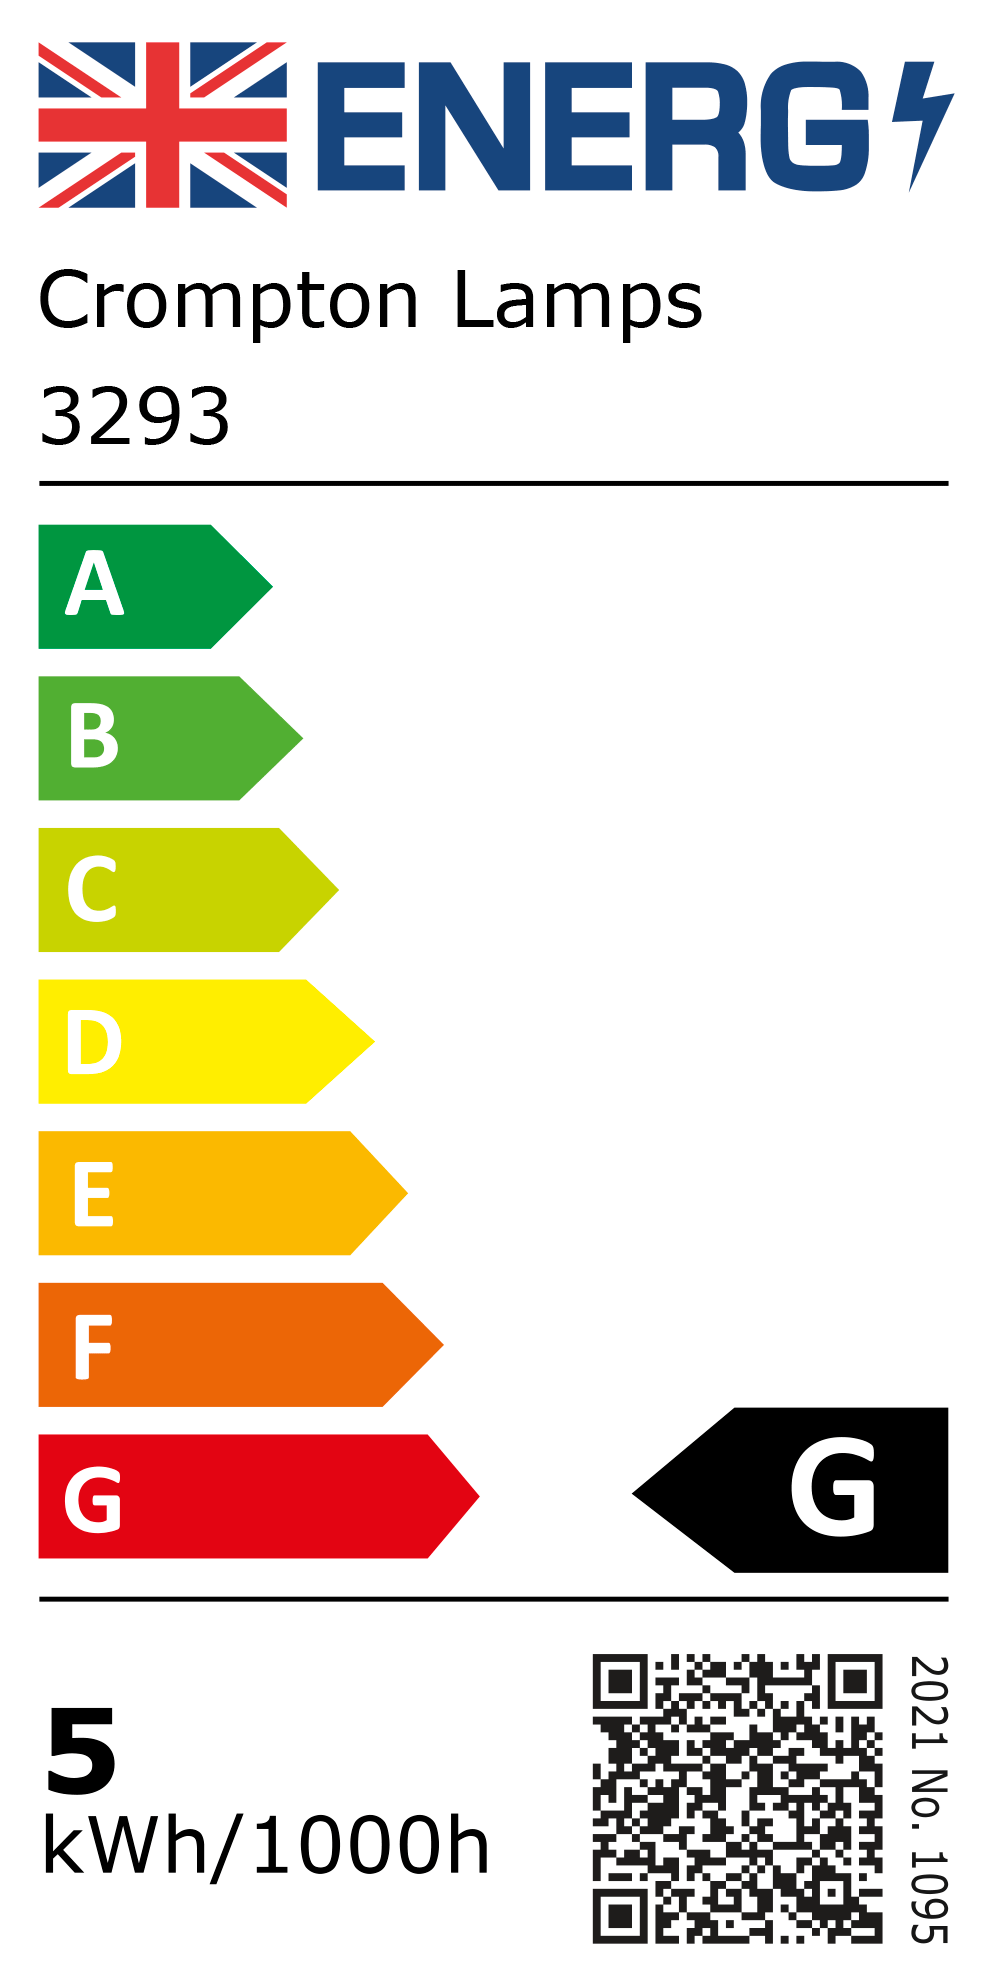 New 2021 Energy Rating Label: Stock Code 3293